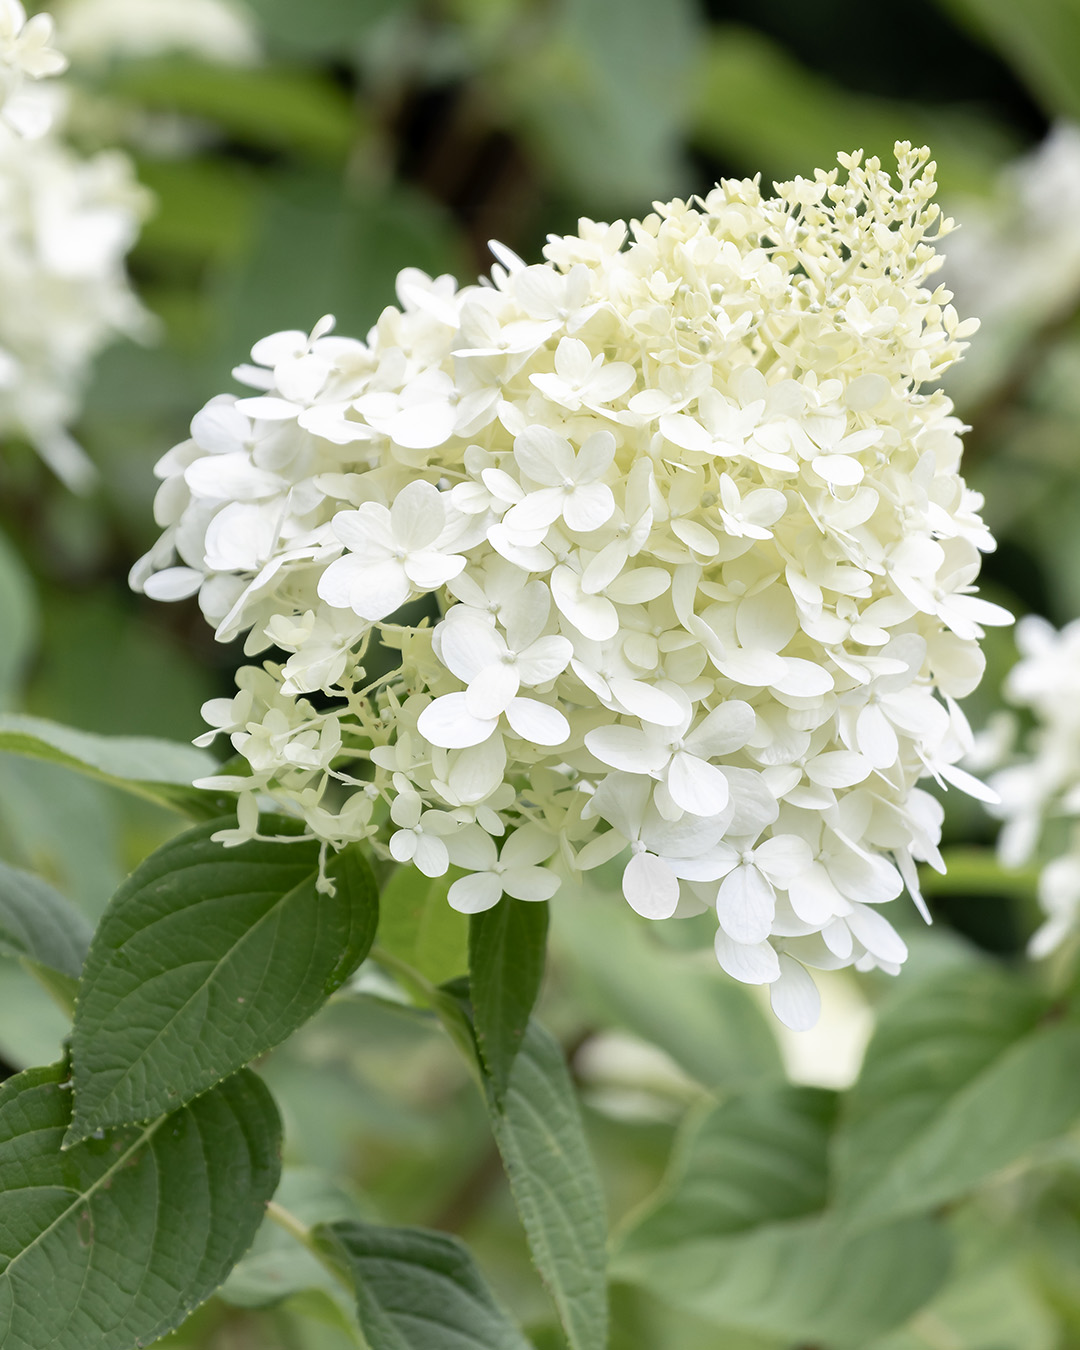 I've learned a lot about planting hydrangeas since my first attempts many years ago. If this is your first time trying, here's how to plant a panicle hydrangea successfully.